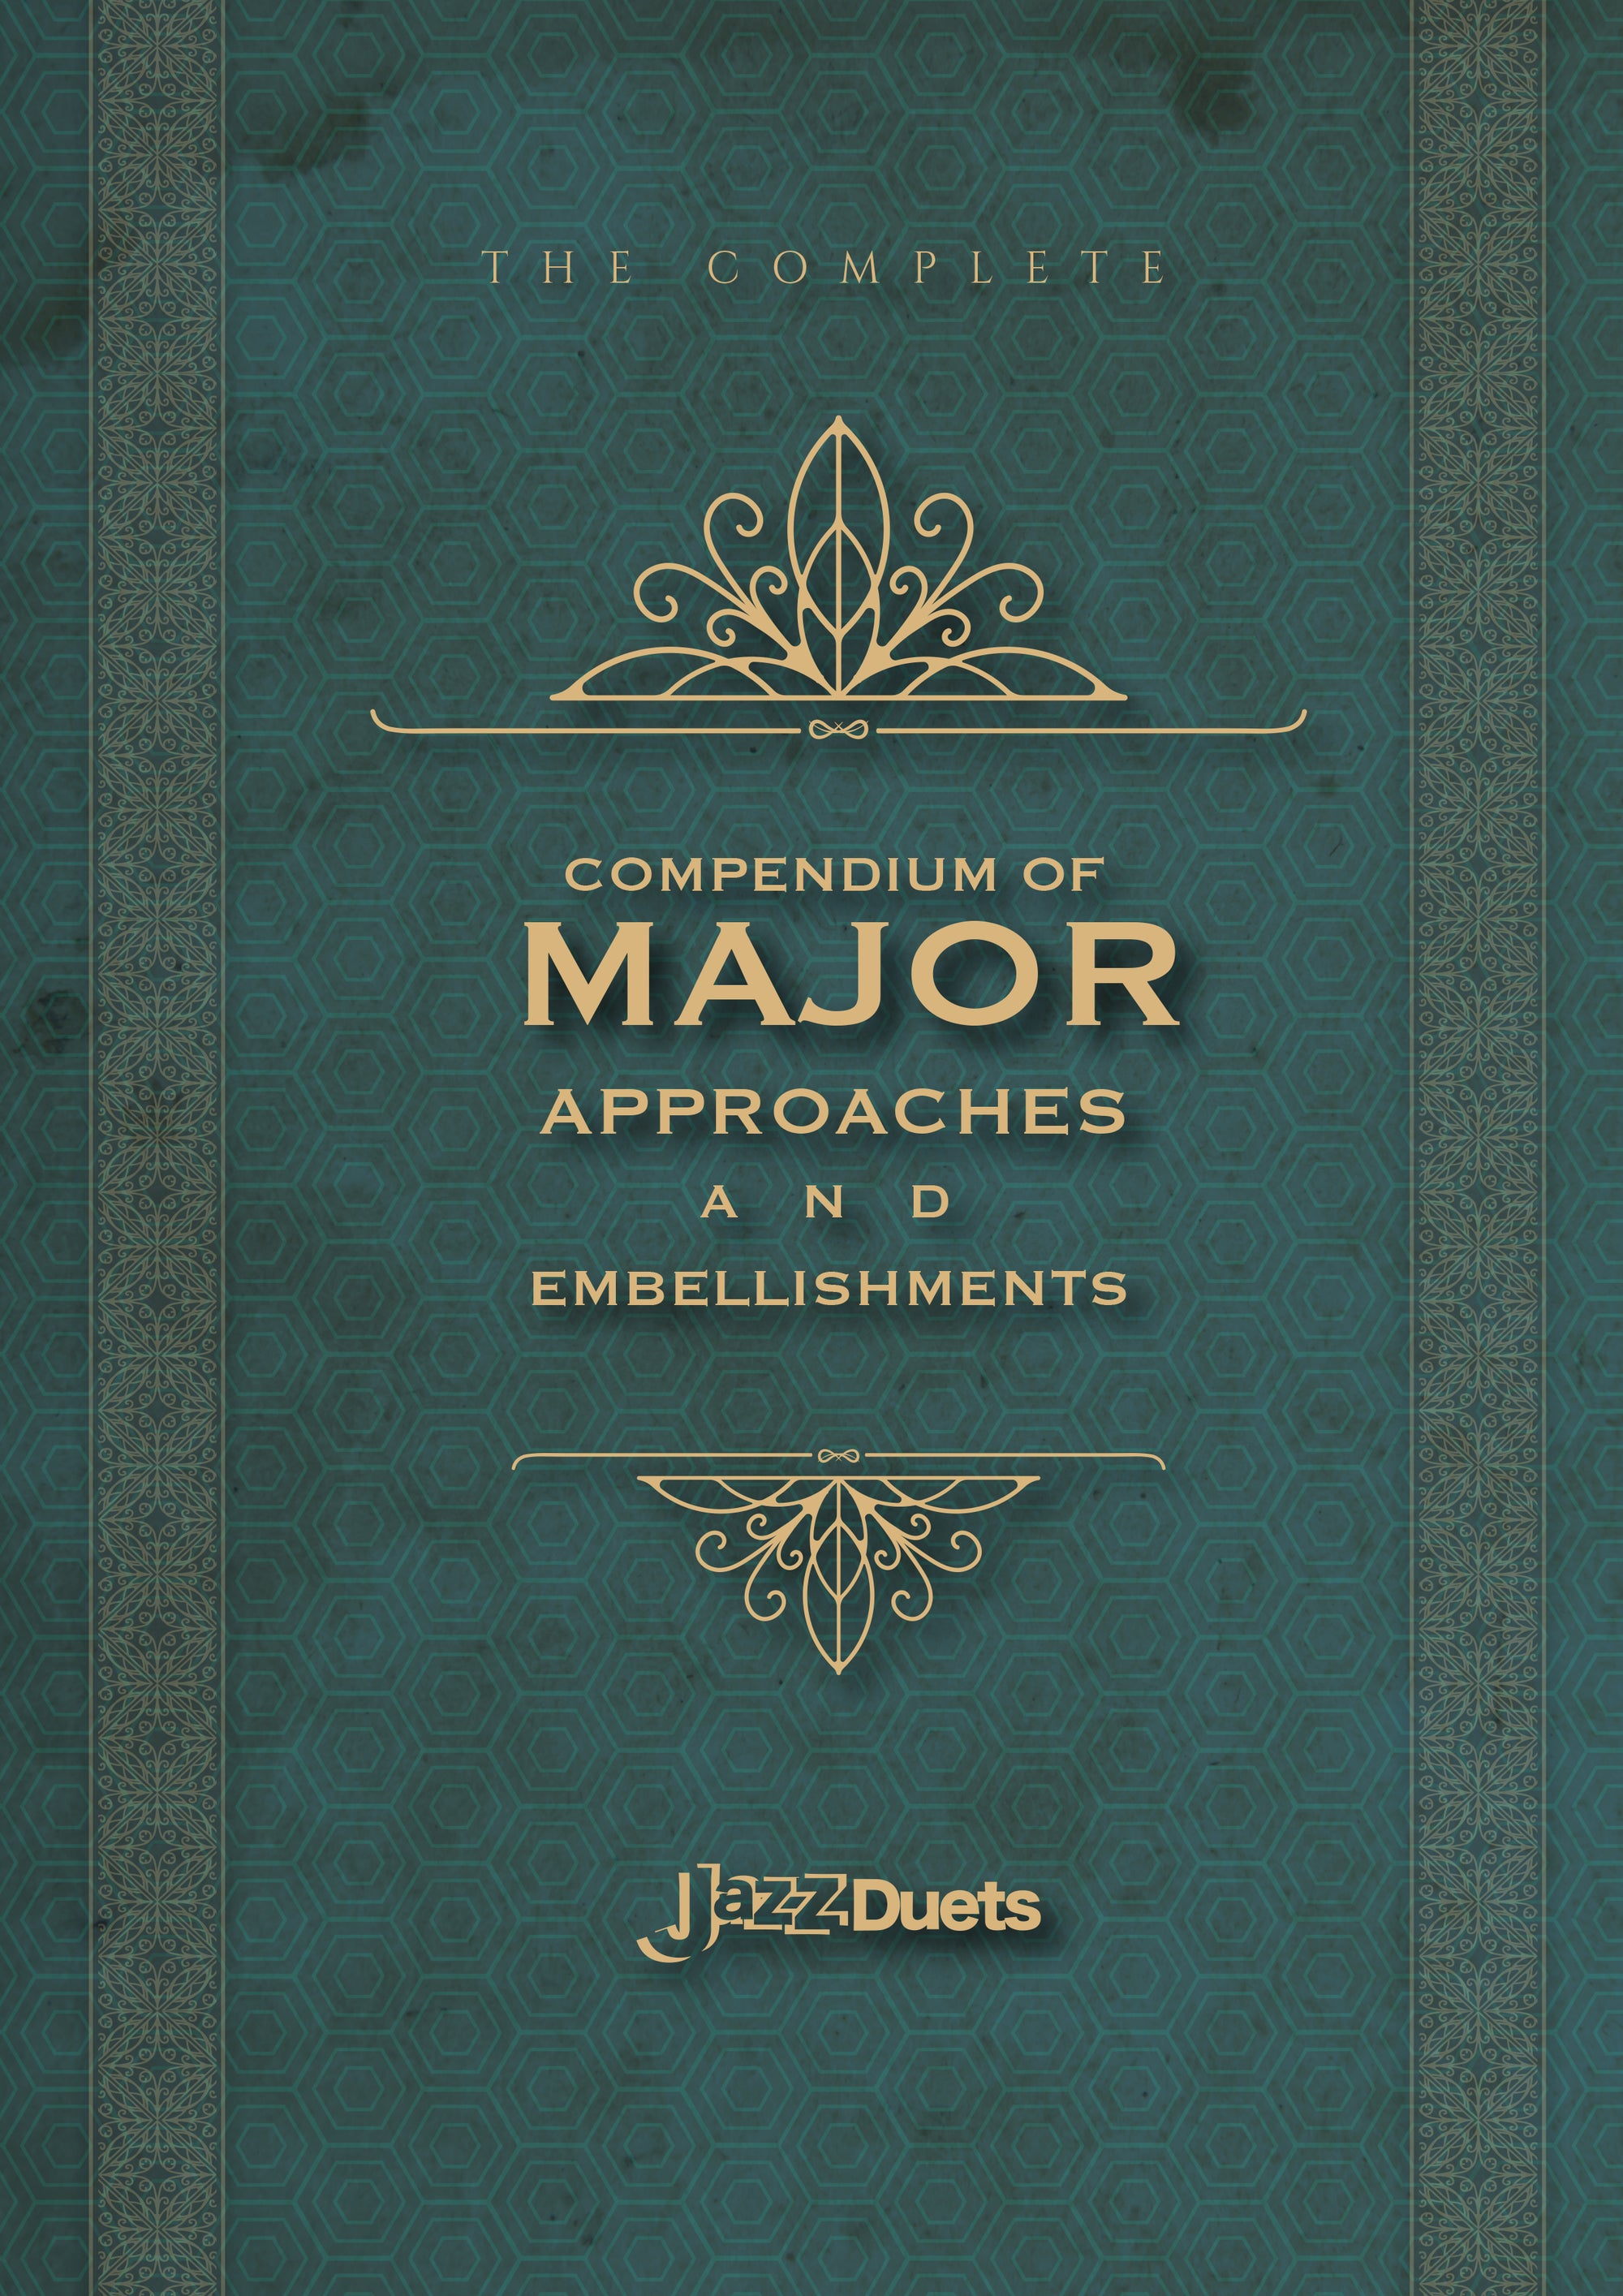 The Complete Compendium of Major Approaches and Embellishments - digital download